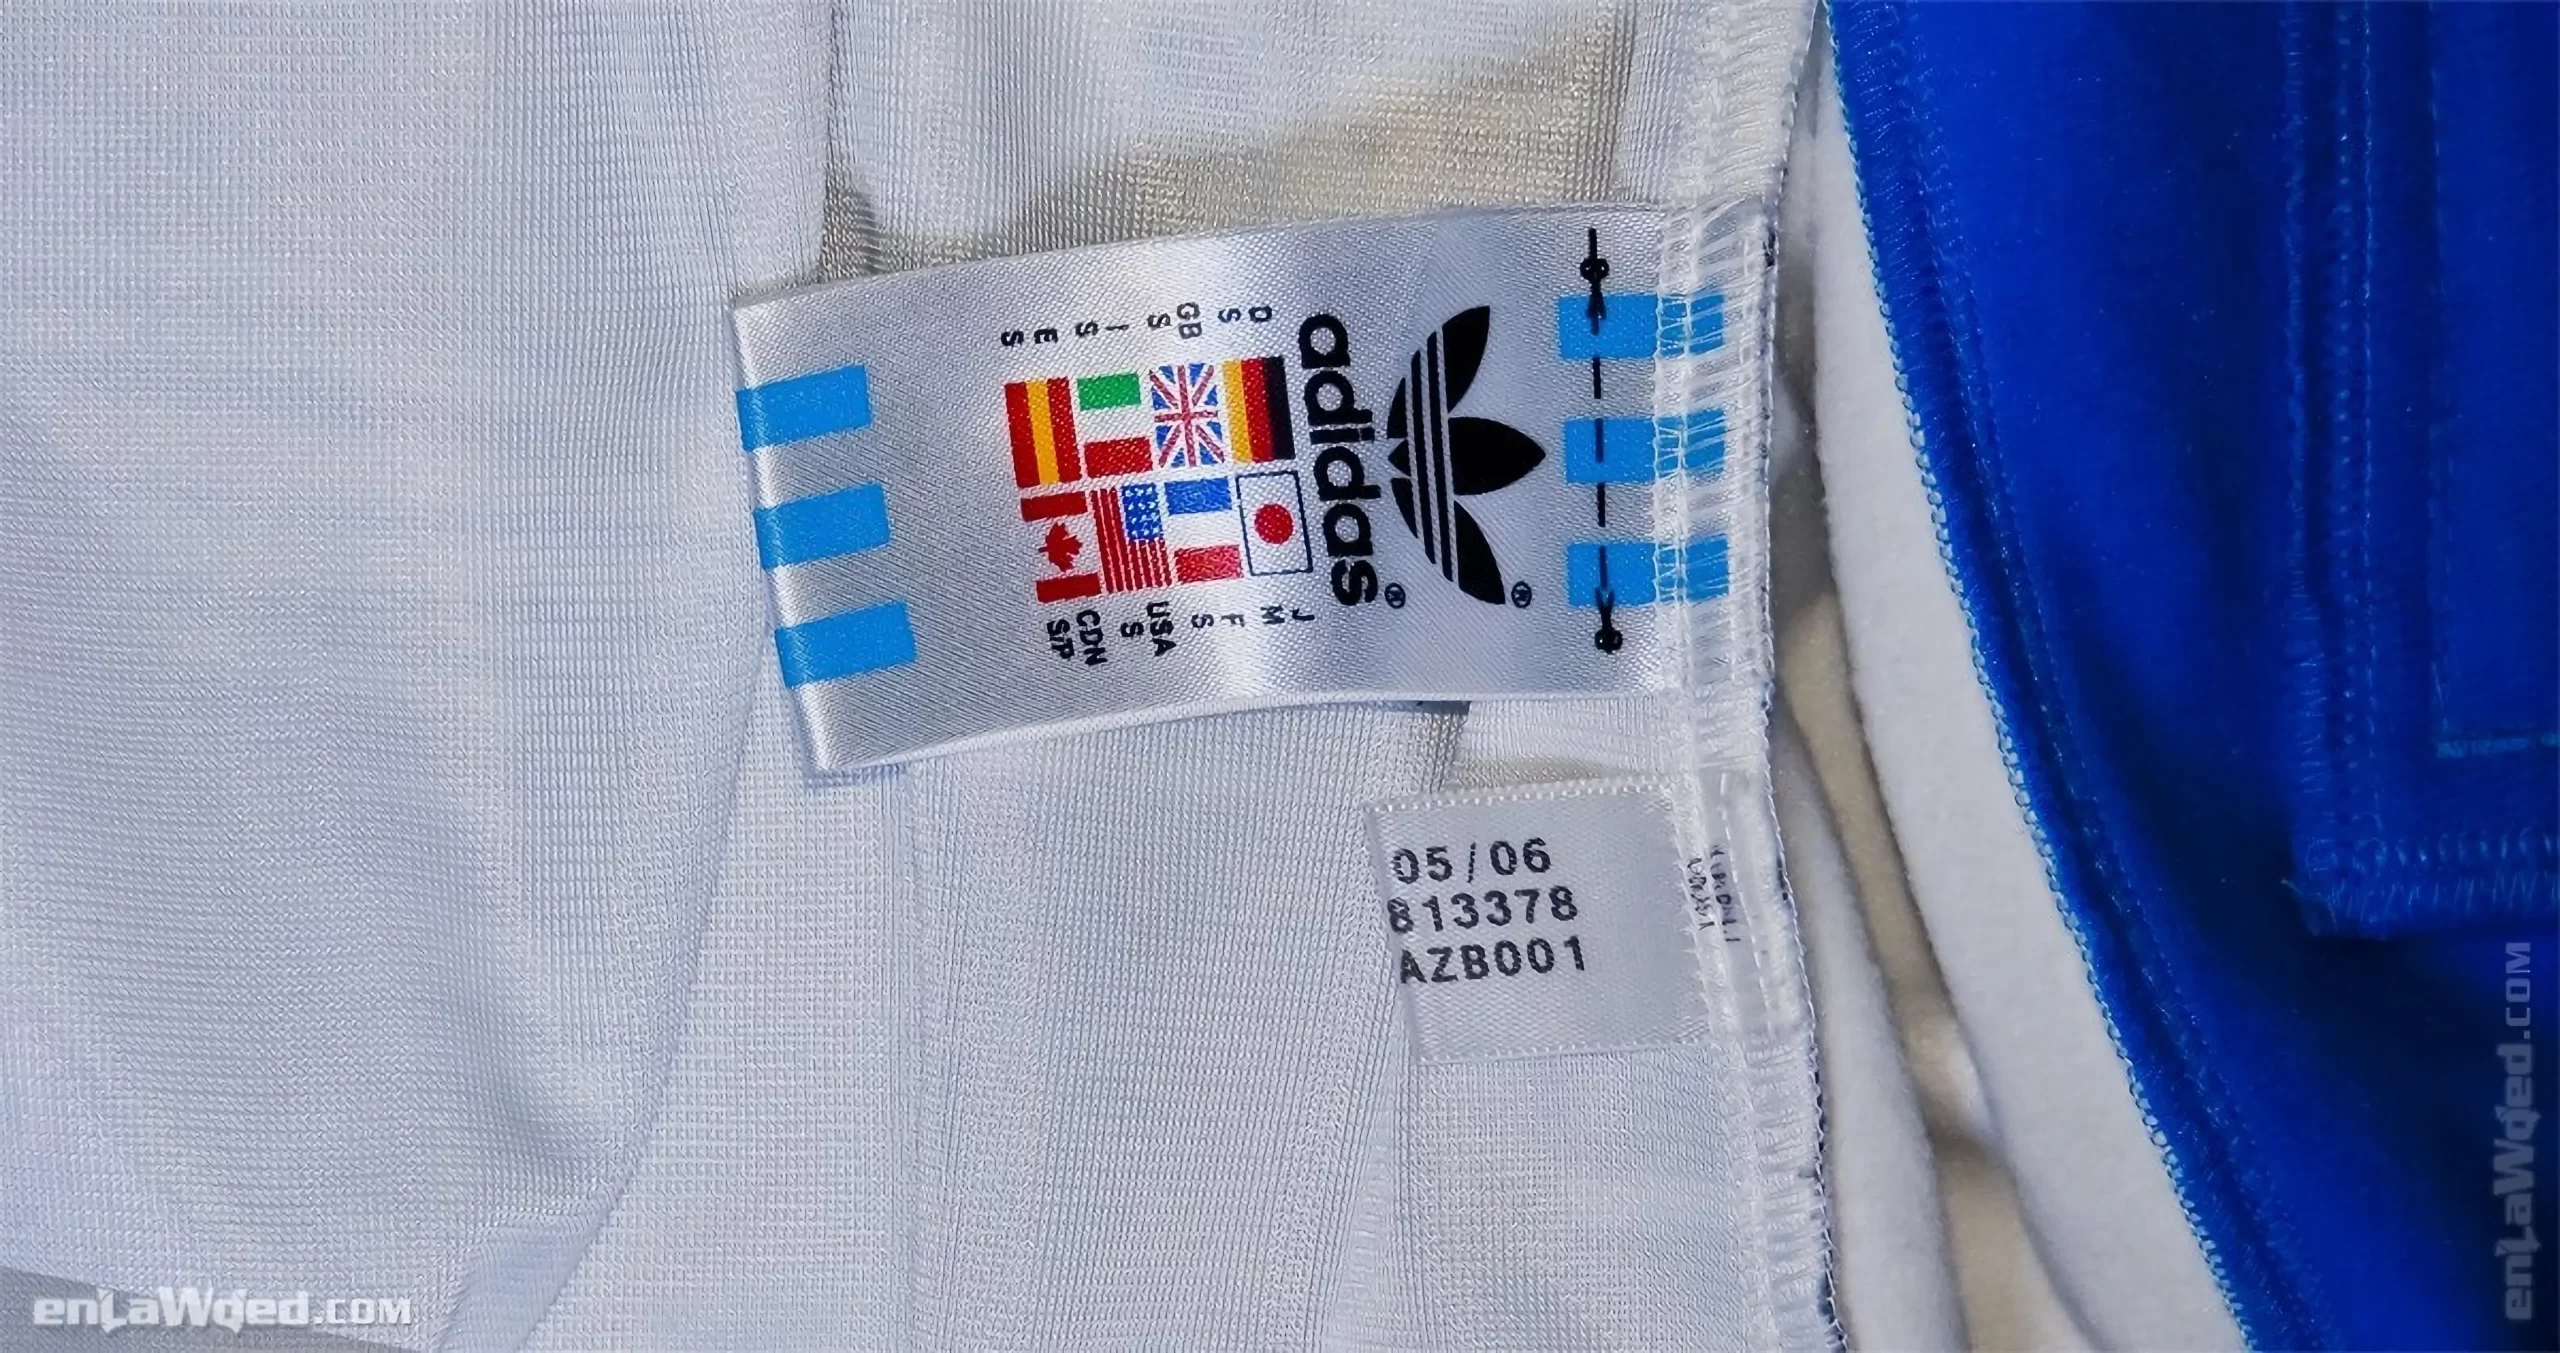 Adidas tag of the Los Angeles jacket, with the month and year of fabrication: 05/2006